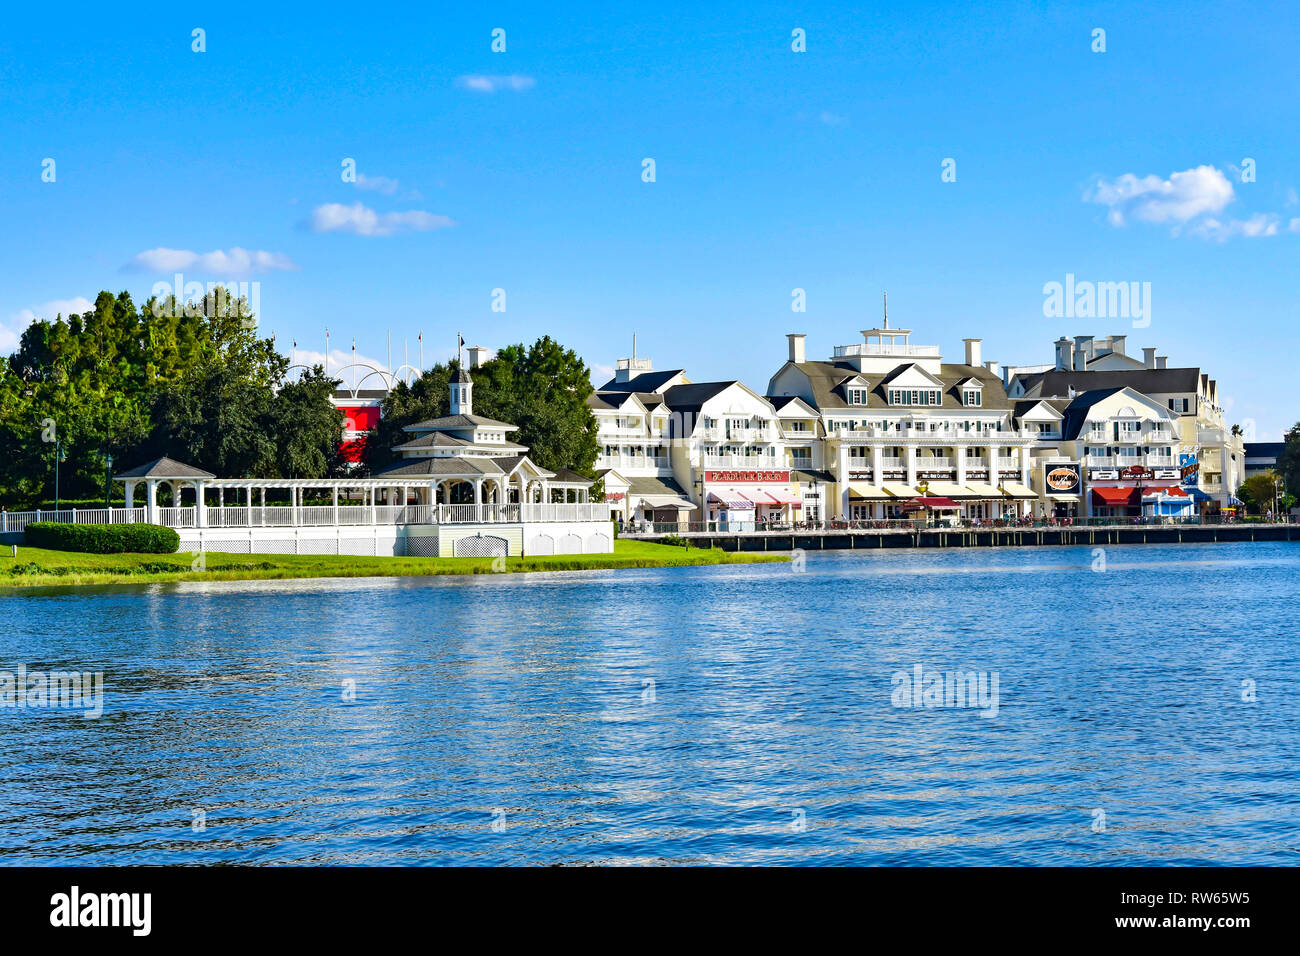 Orlando, Florida. February 09, 2019 . Panoramic view of lovely Victorian ride on dockside and restaurants at Lake Buena Vista area. Stock Photo